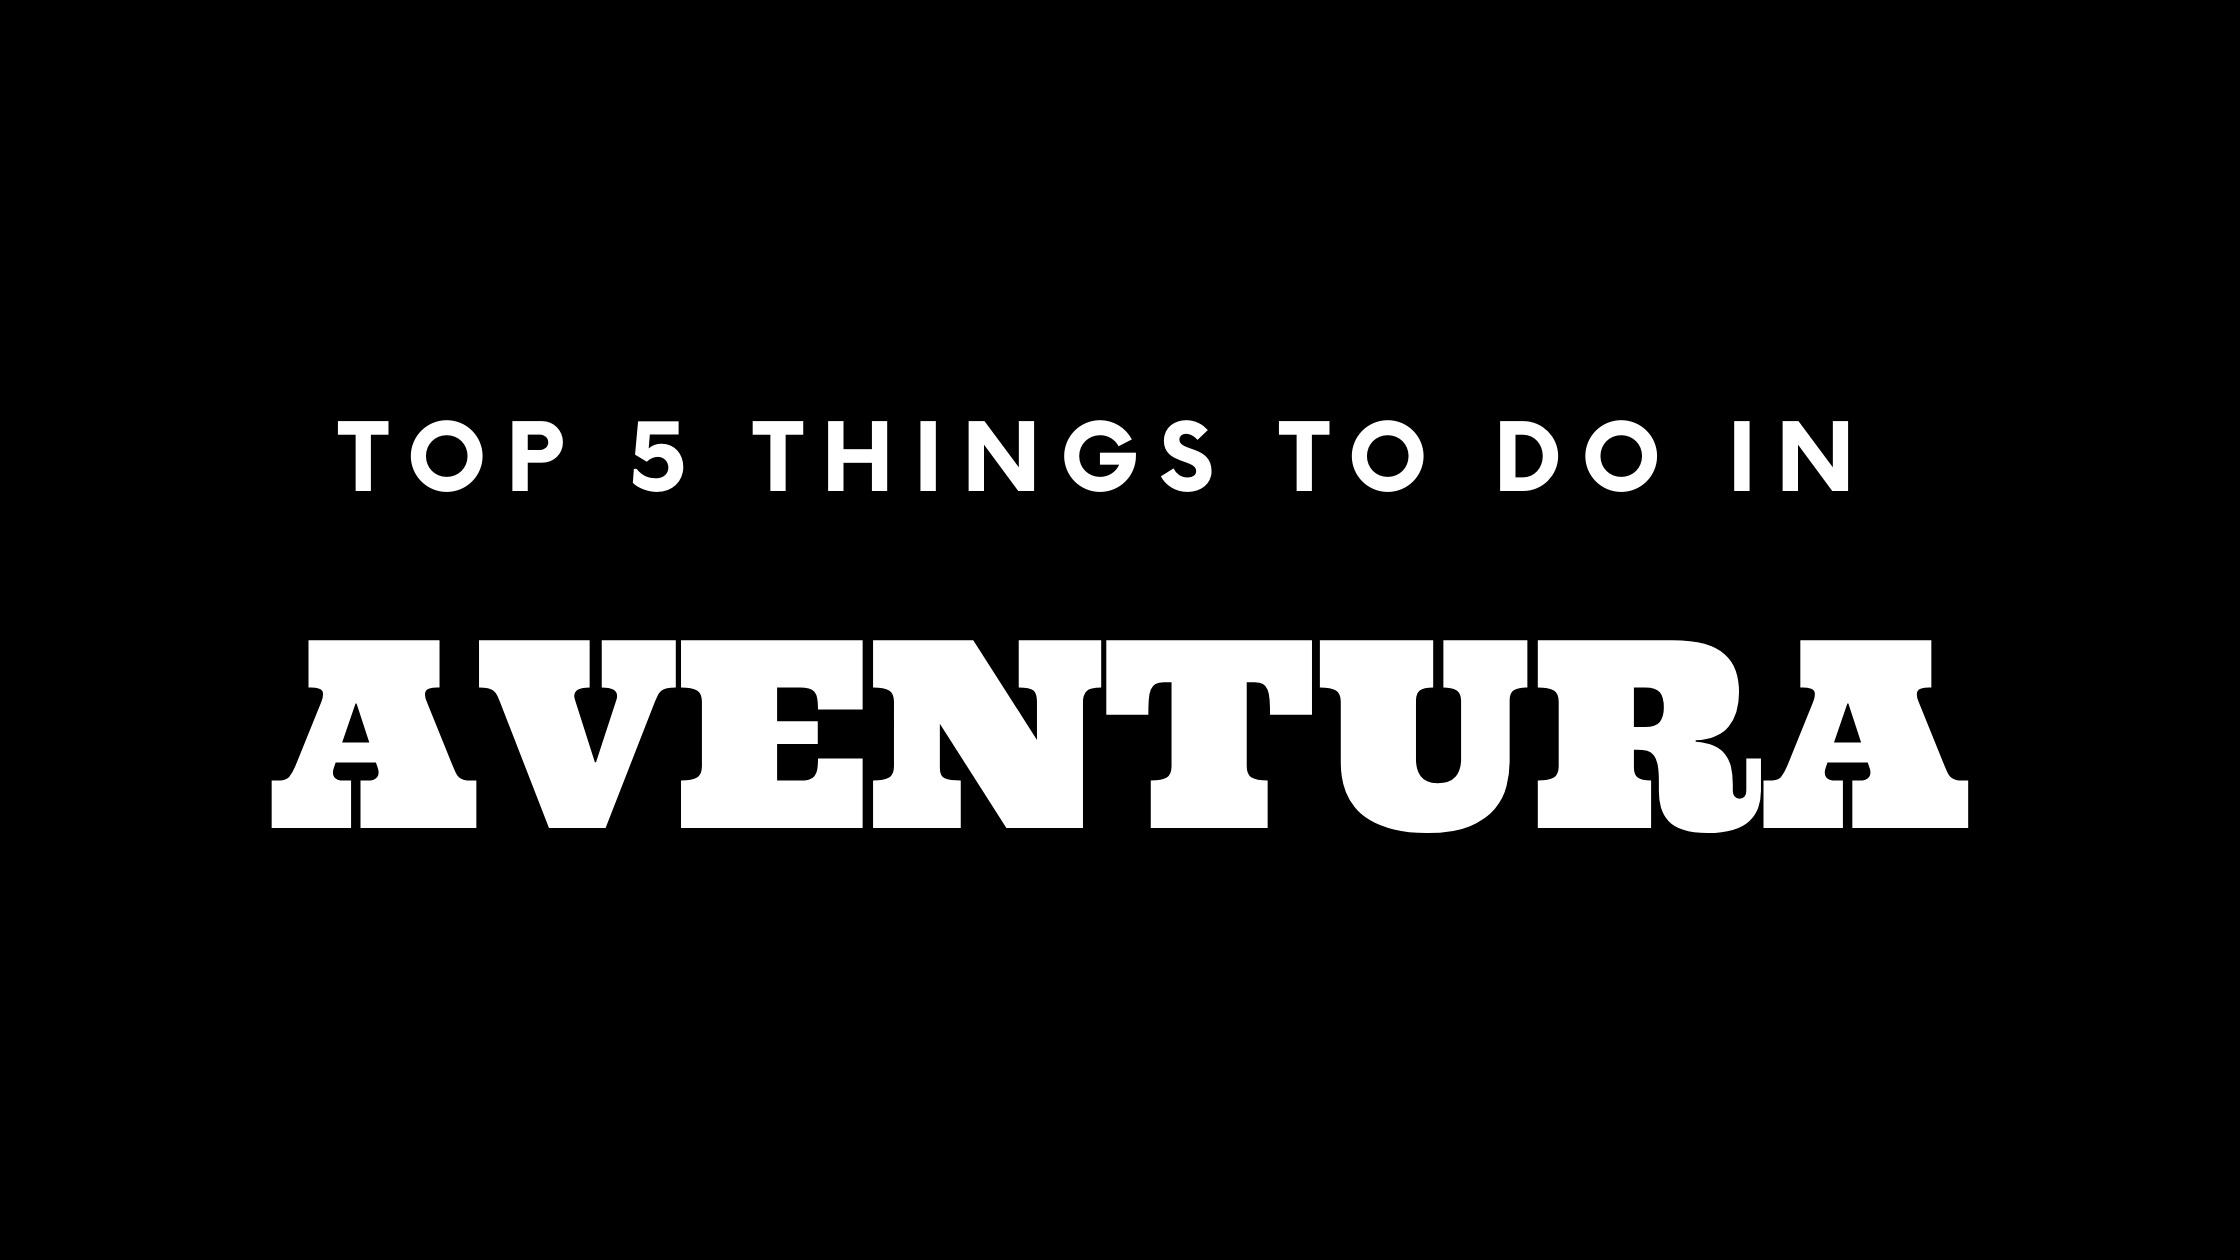 Top 5 Things To Do in Aventura